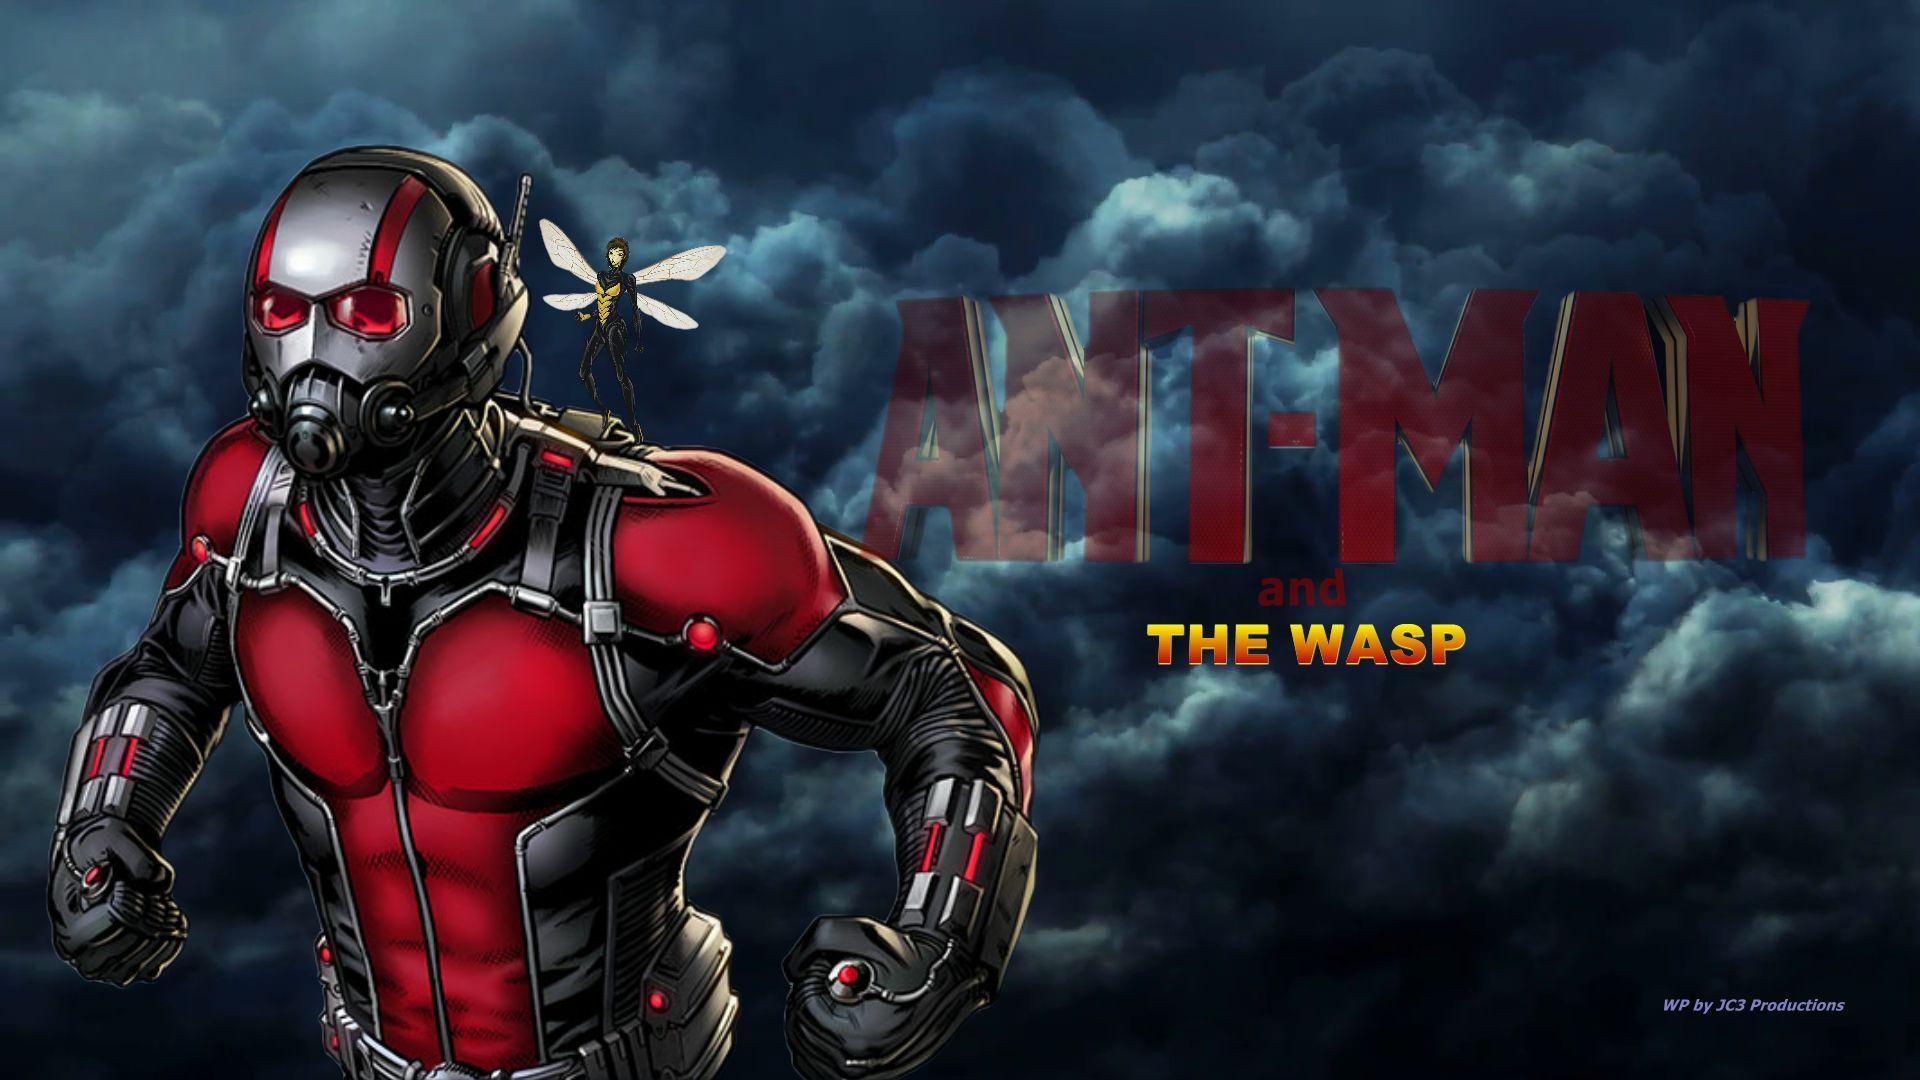 Ant Man Image ANT MAN The Wasp HD Wallpaper And Background Photo